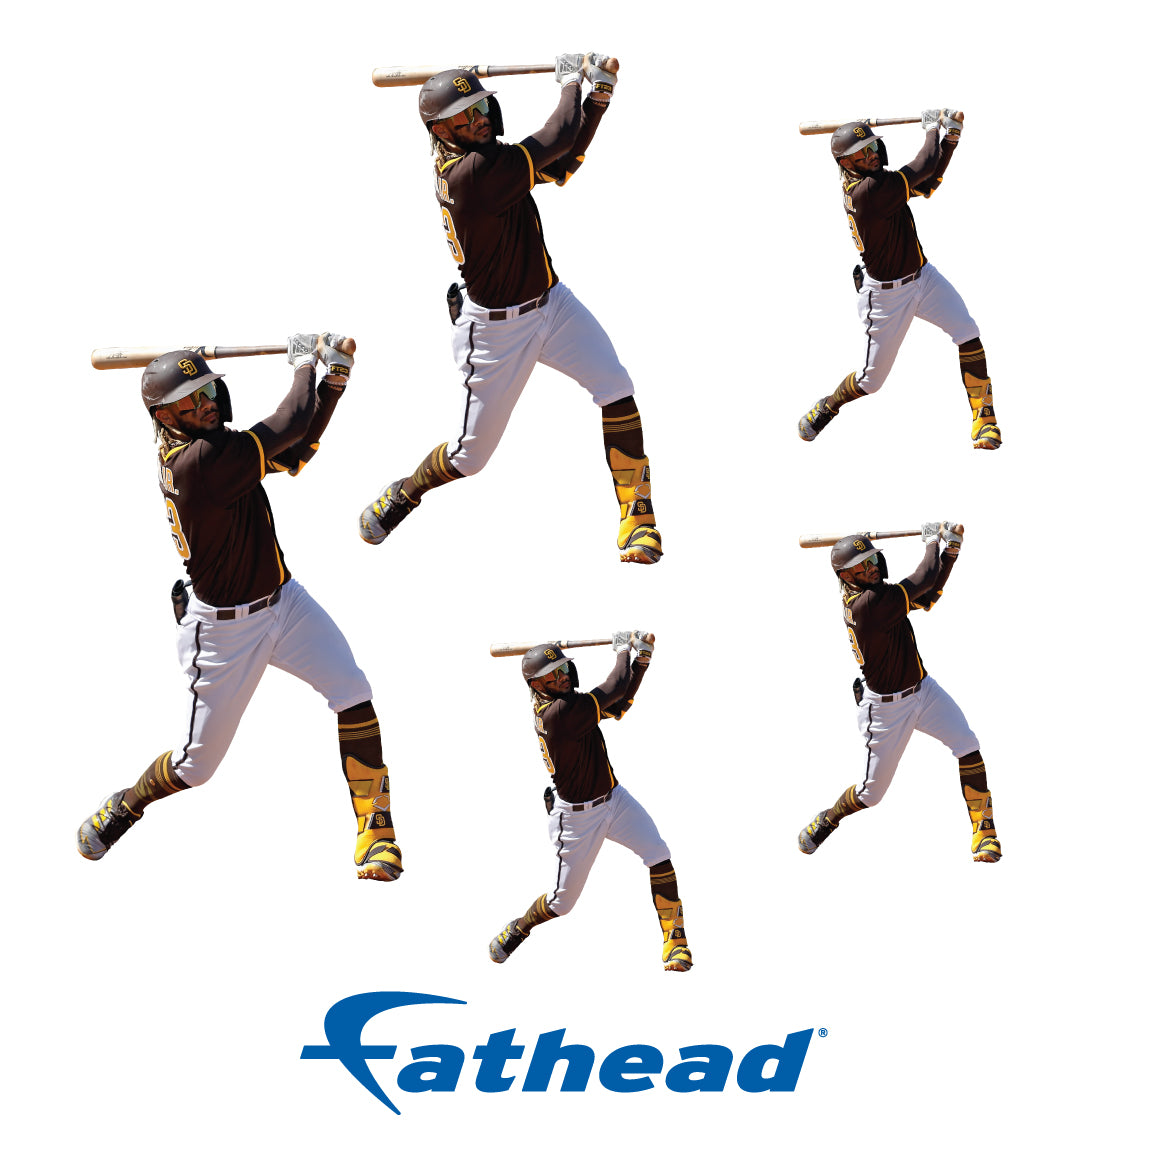 Sheet of 5 -San Diego Padres: Fernando Tatís Jr. Player Minis - Officially Licensed MLB Removable Adhesive Decal